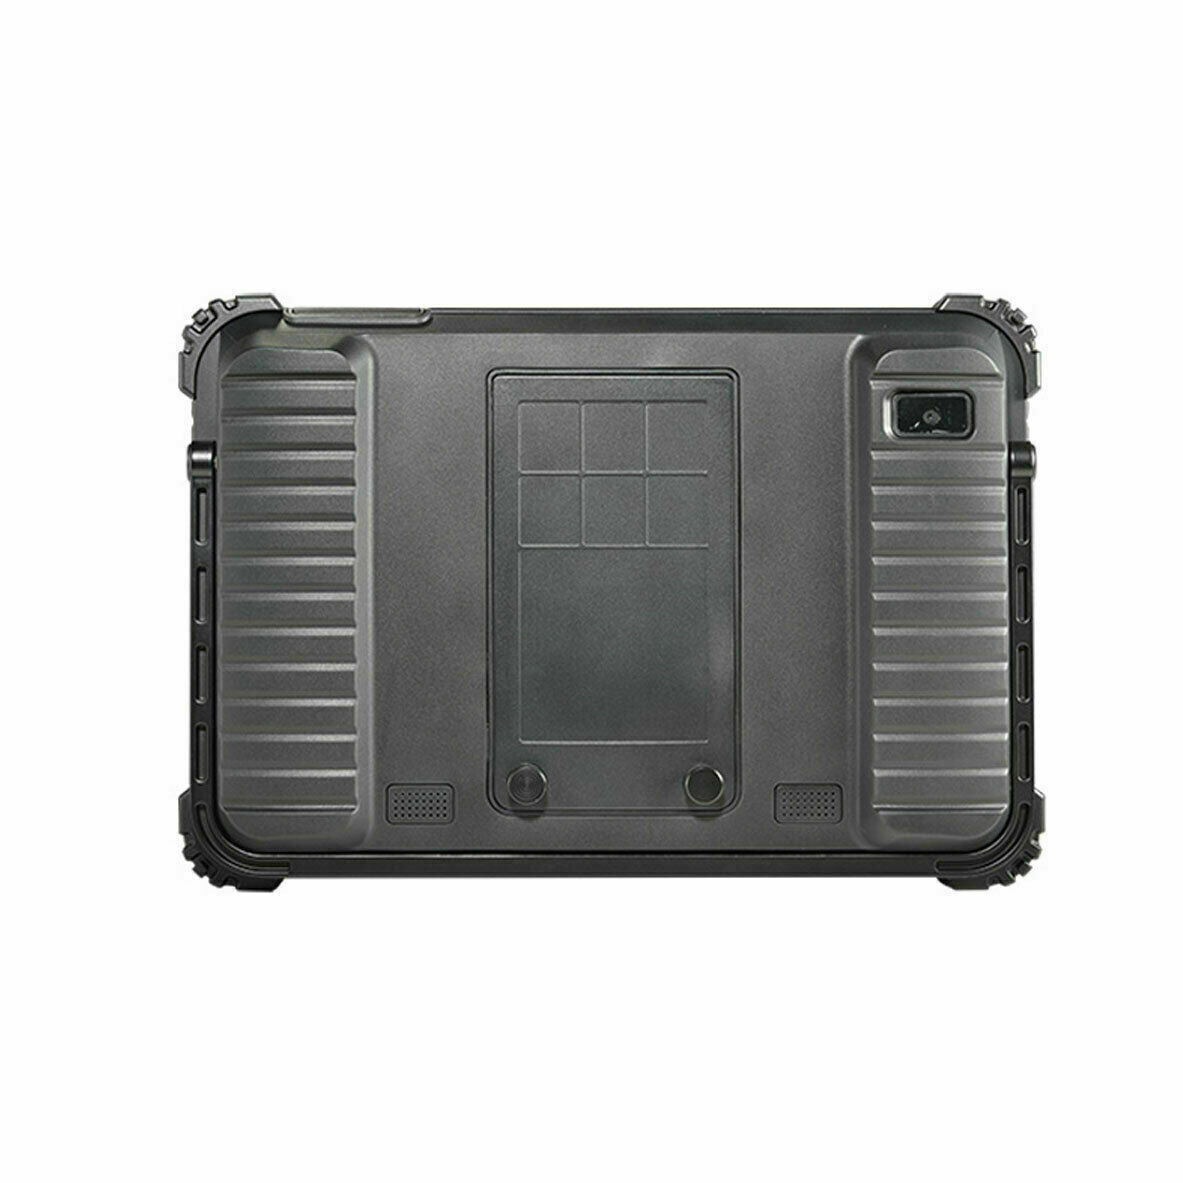 iCarsoft CR Ultra Multi-Brand Vehicle Multi-Systems Android OSTouch Screen